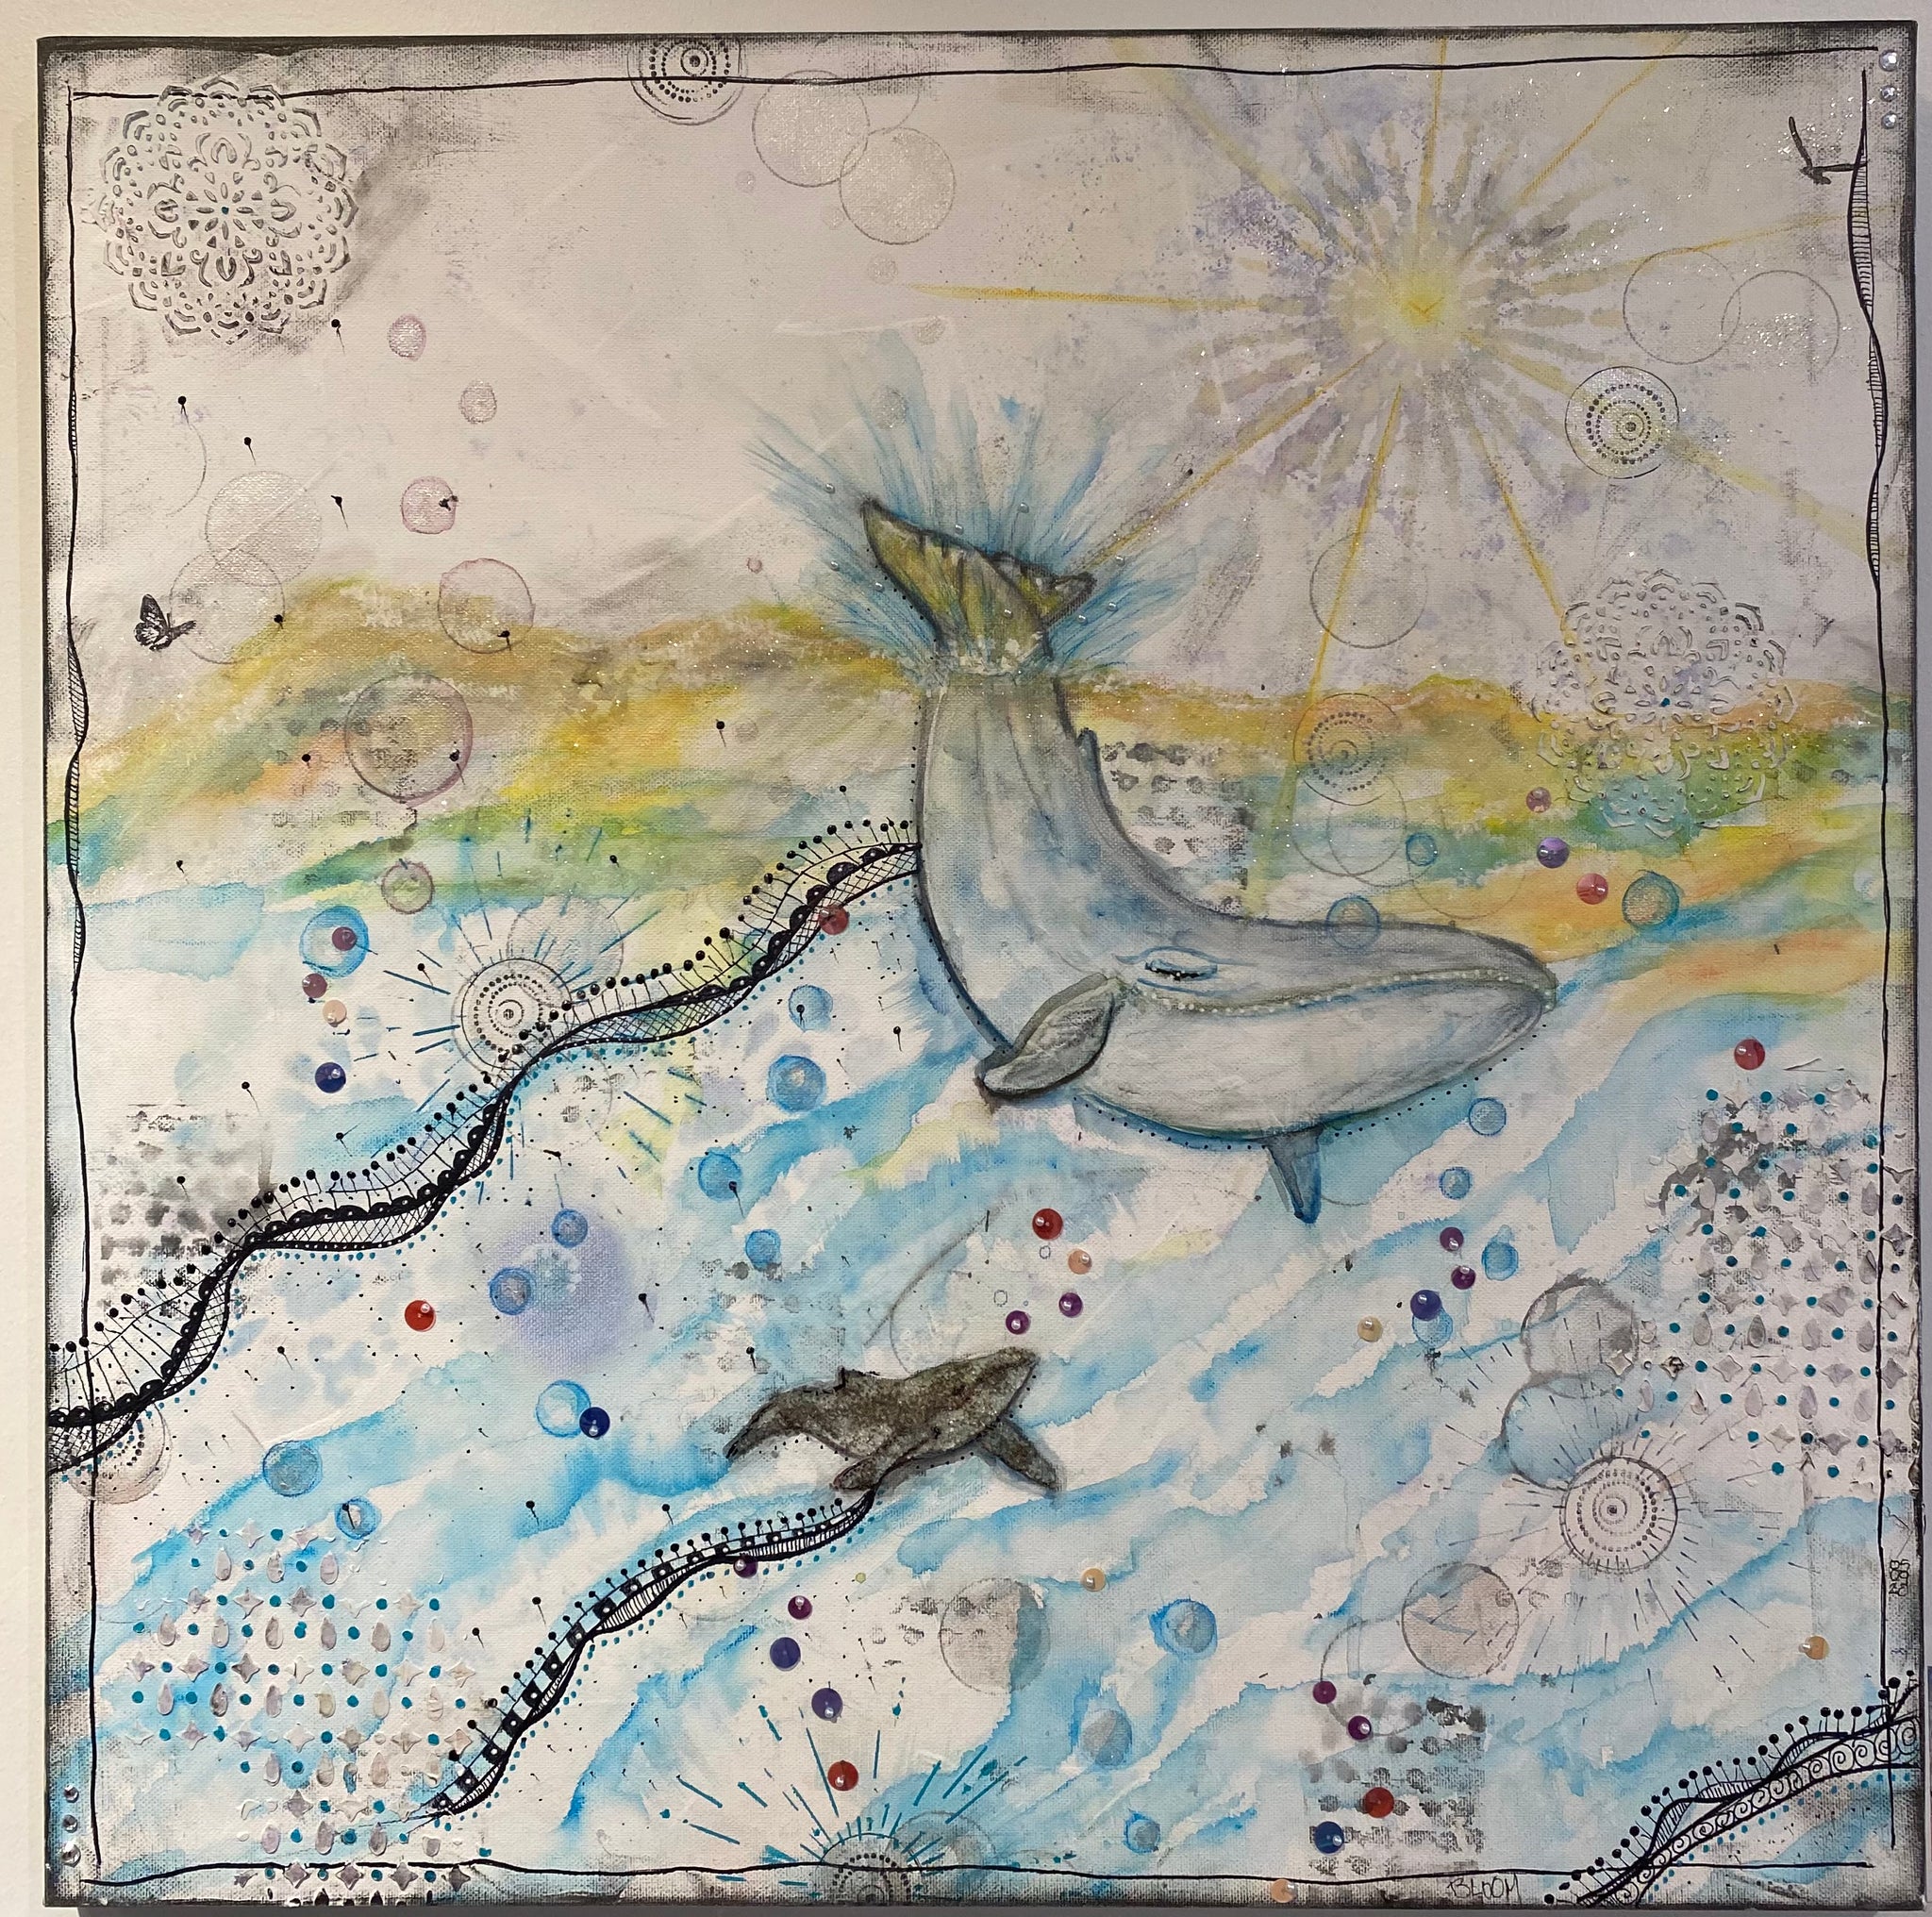 Sea Dreams using mixed media, acrylic, and watercolor painted by Blooming Colors Art